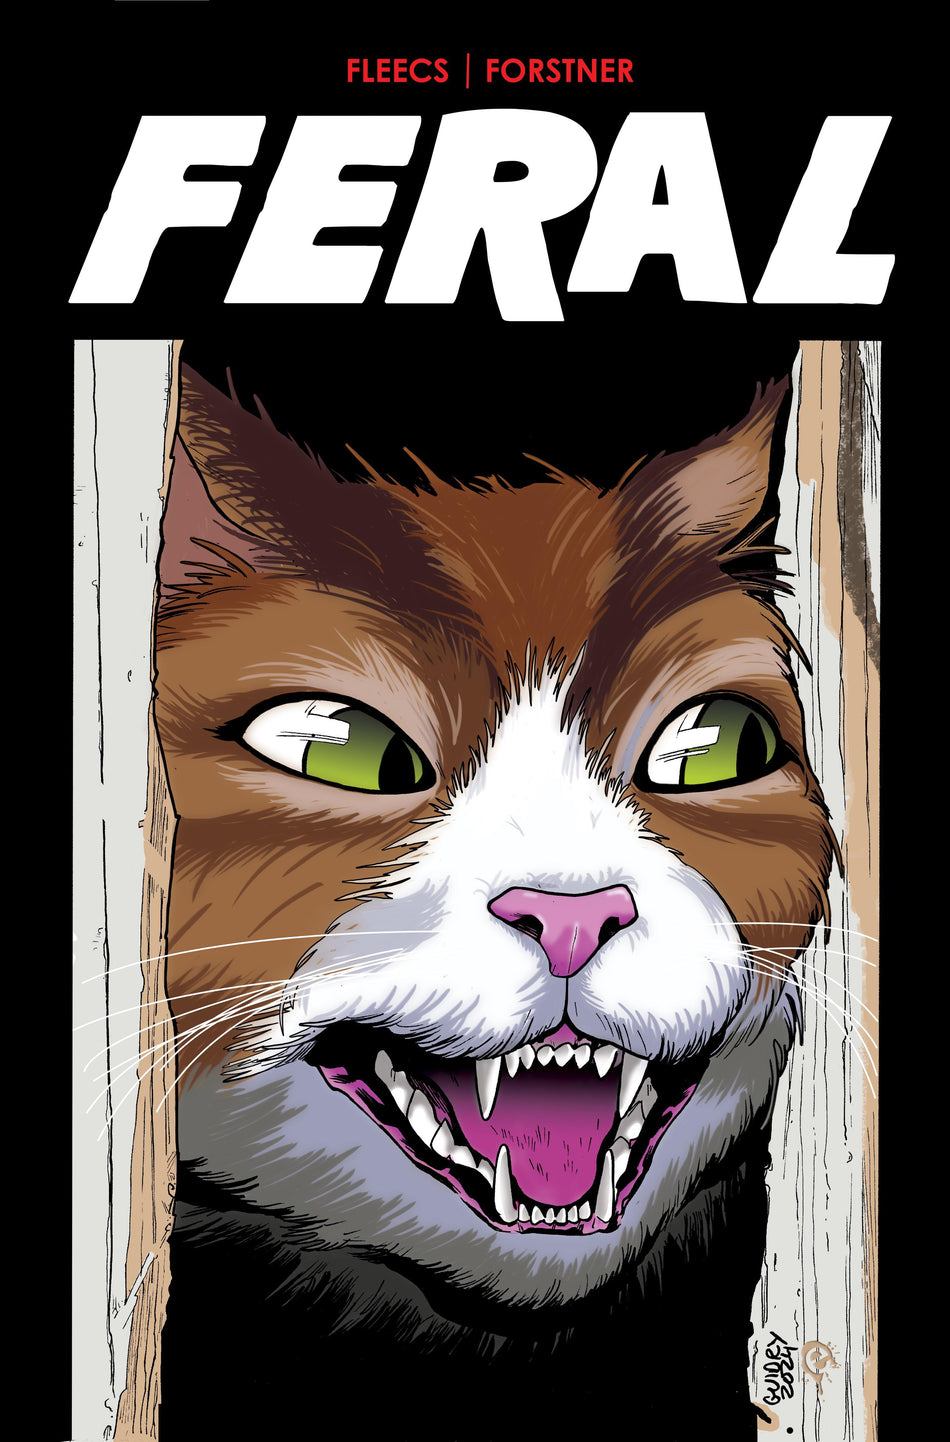 Feral #1 Gavin Guidry Exclusive "Shining" Homage (Limited to 500)